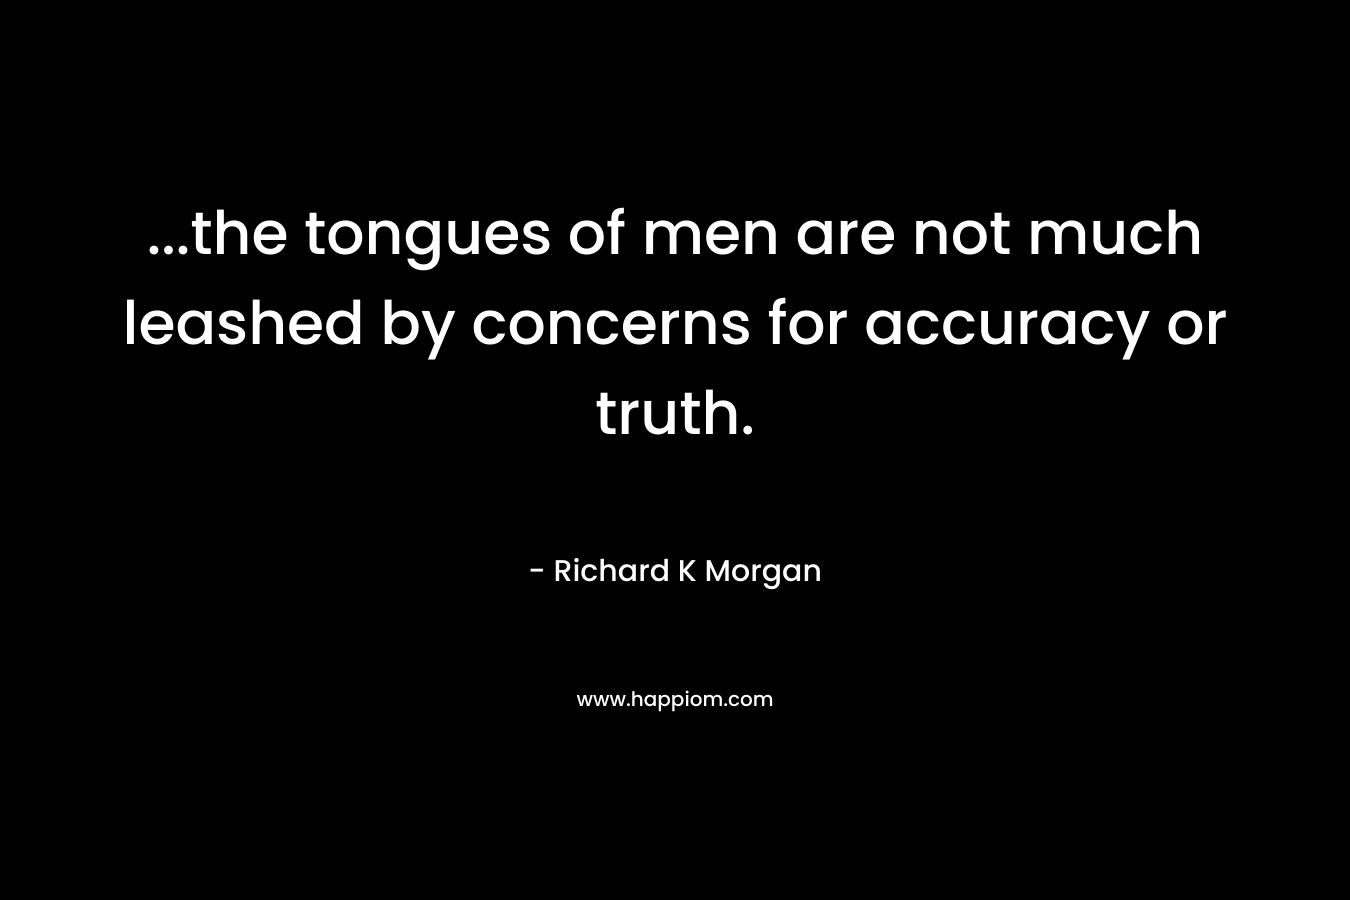 ...the tongues of men are not much leashed by concerns for accuracy or truth.